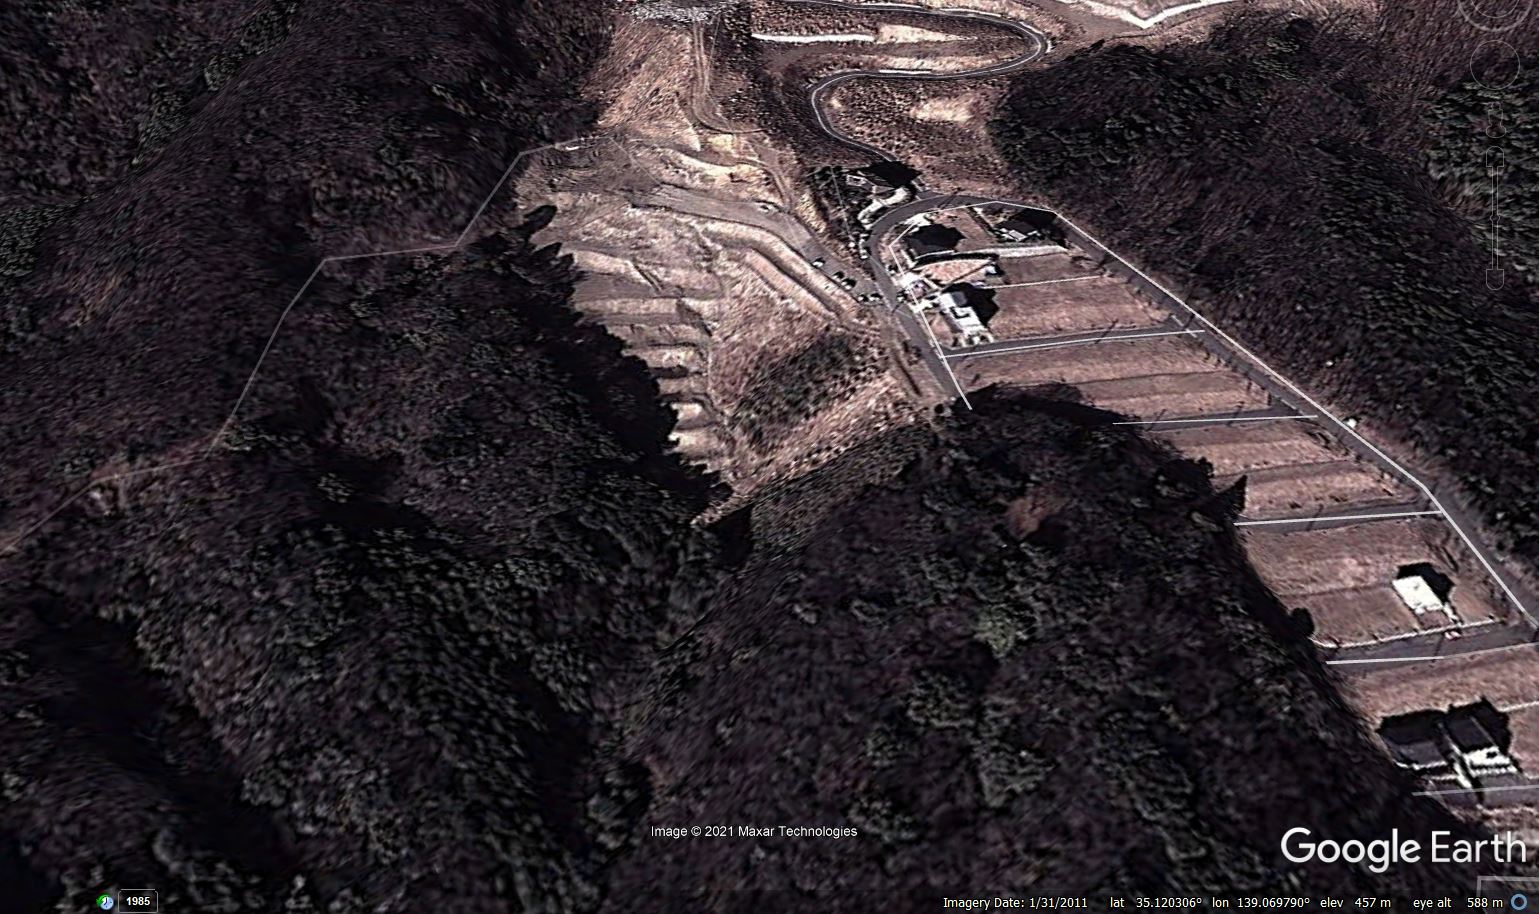 Archive Google Earth image of the source zone of the Atami landslide in Japan. 